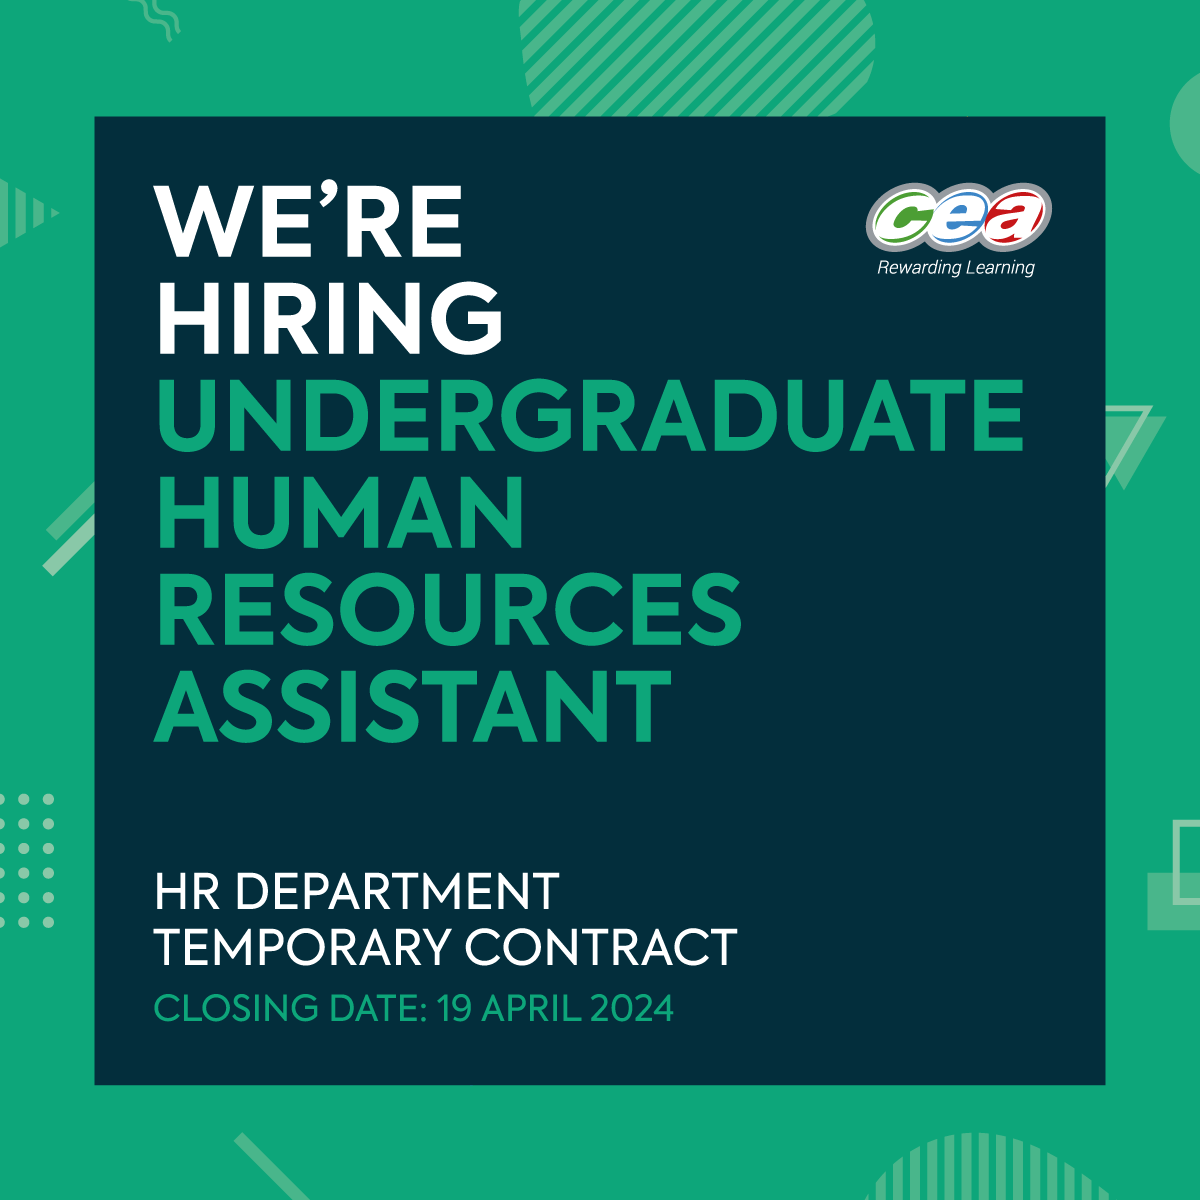 CCEA Undergraduate Opportunity 2024 Are you a talented and motivated Human Resources undergraduate? We are looking for the right undergraduate student to recruit into a temporary position beginning September 2024 for approximately 1 year. ow.ly/r5fE50R7jTu